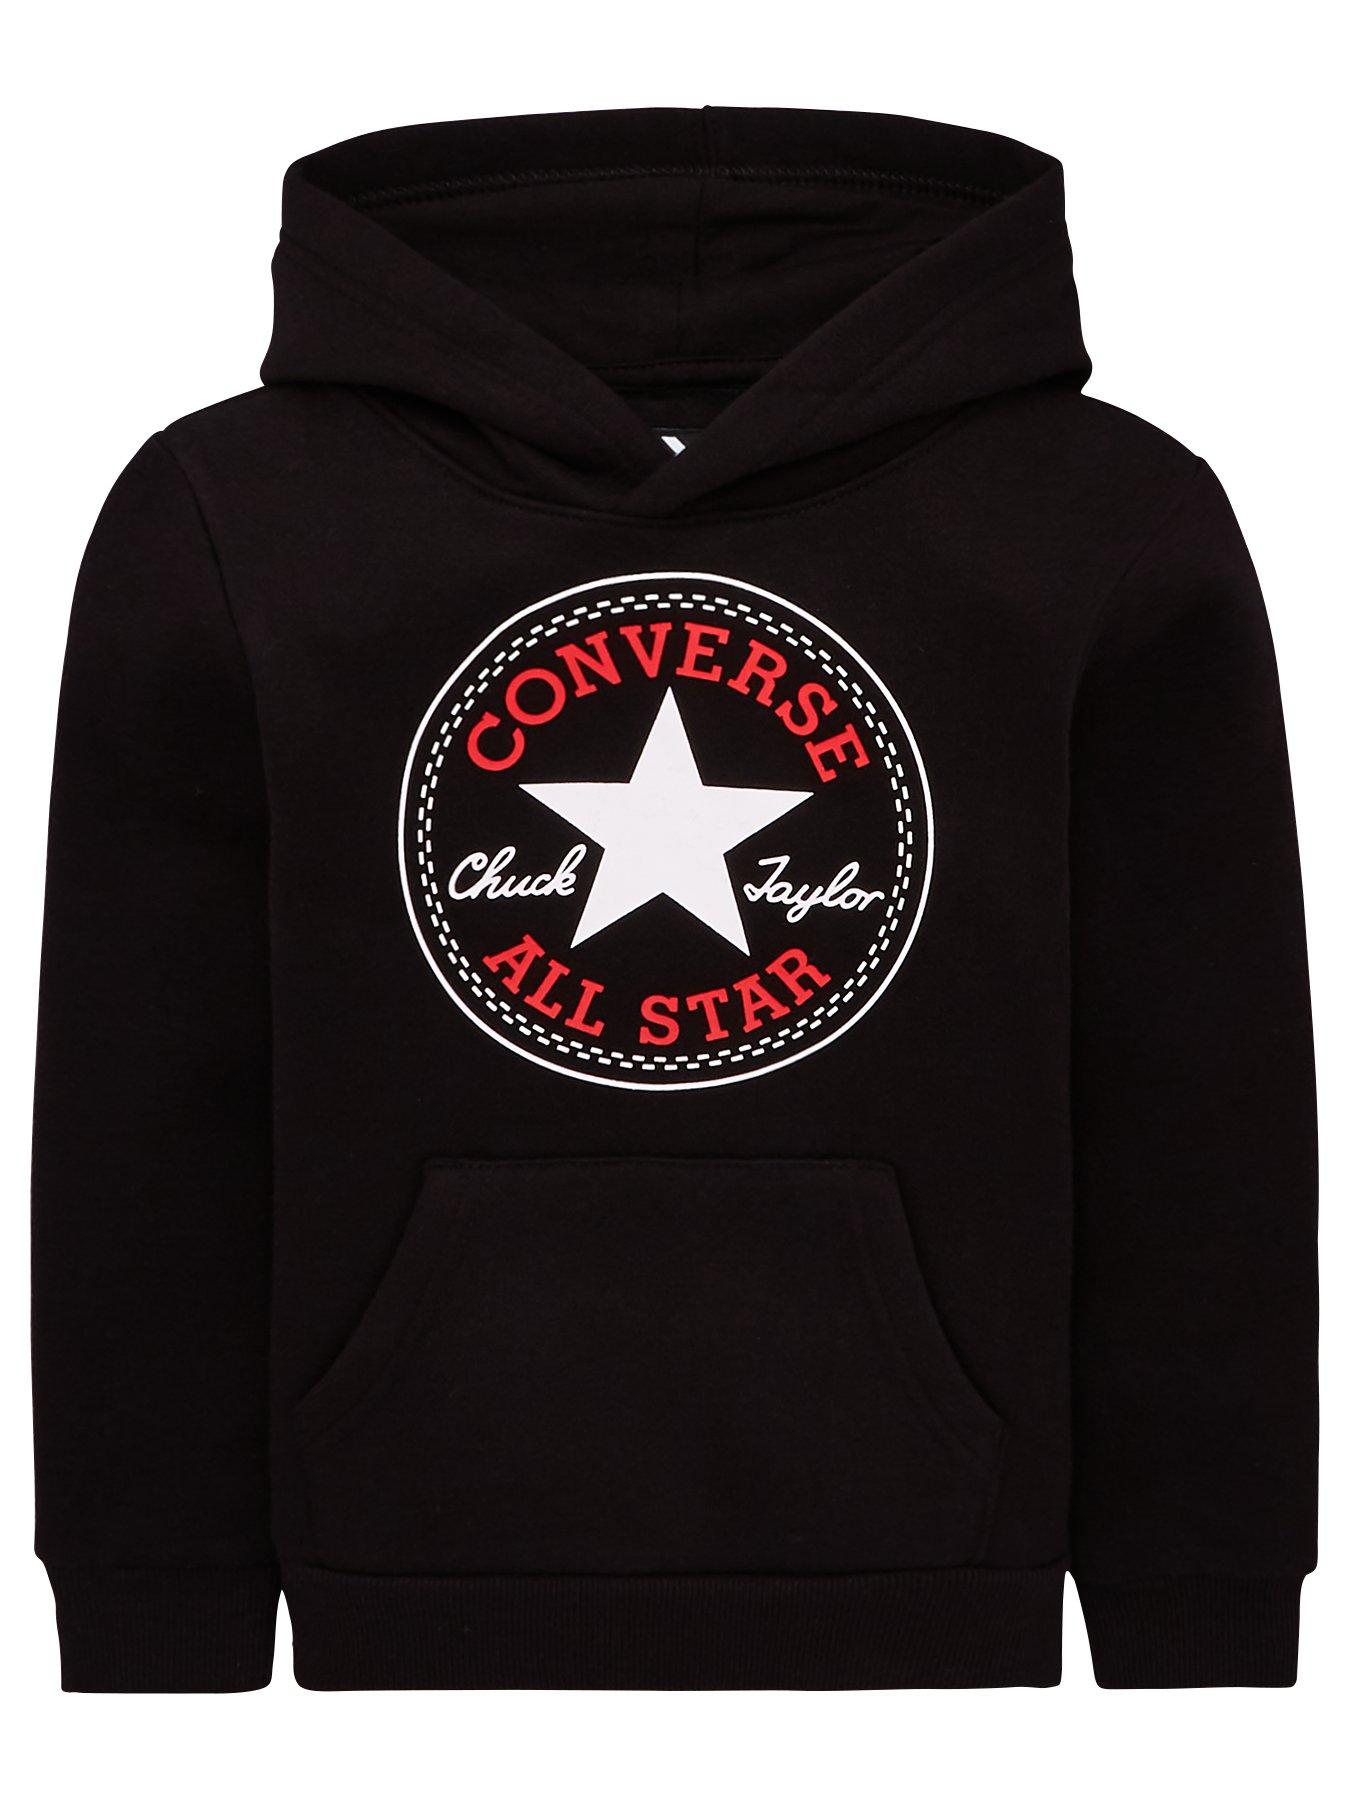 converse baby clothes uk